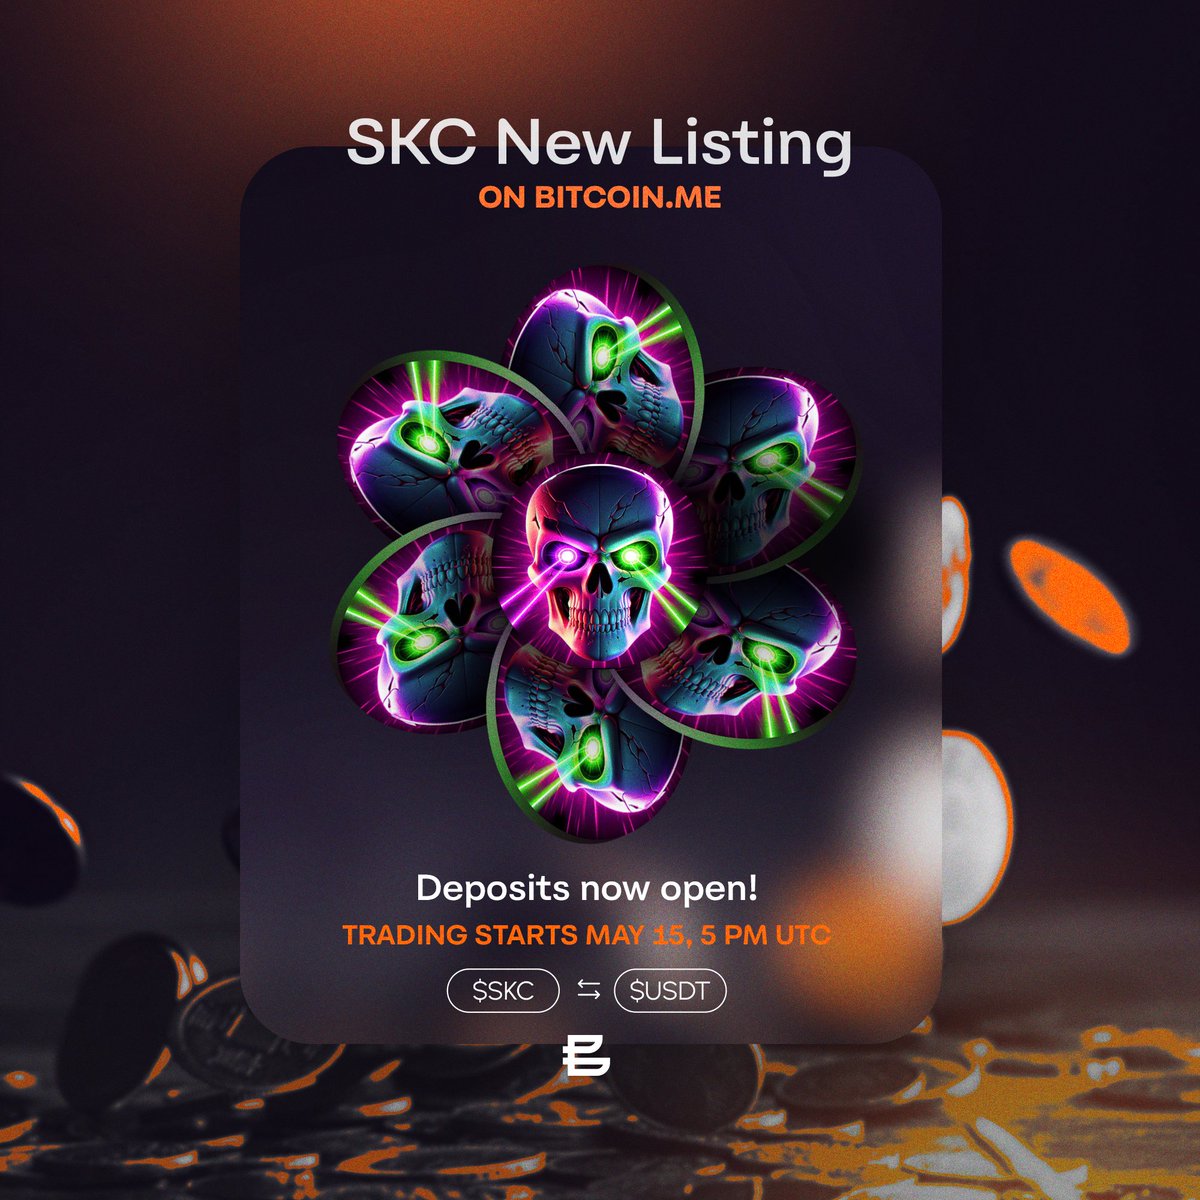 We're not just💀💀💀-ing around!

@SkullKleverCoin $SKC deposits are live on Bitcoin.me. 

Get your share. Trading starts tomorrow at 5 PM UTC.  

#NewListing